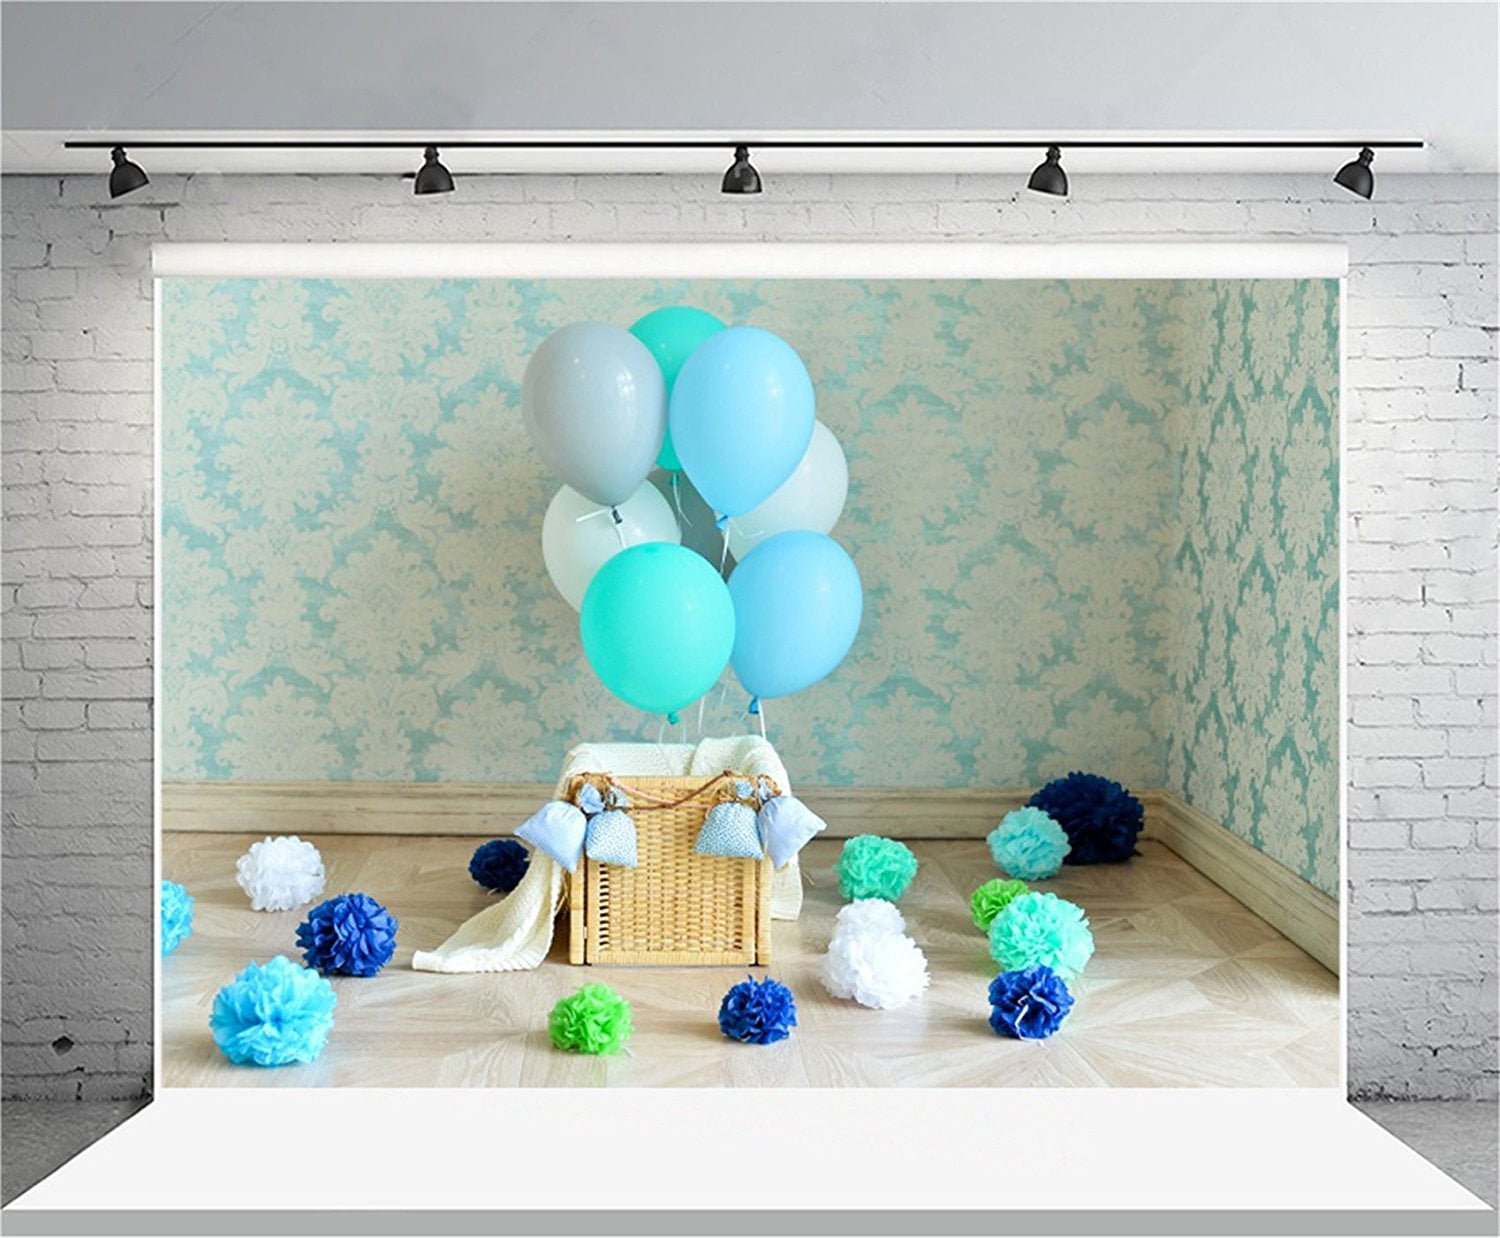 Background Wall Drop Spring Jungle Party Photographic Backdrops Newborn Birthday Party Baby Shower Photo Studio Props Natural Green Lawn Party Product Photography Background Backdrop 